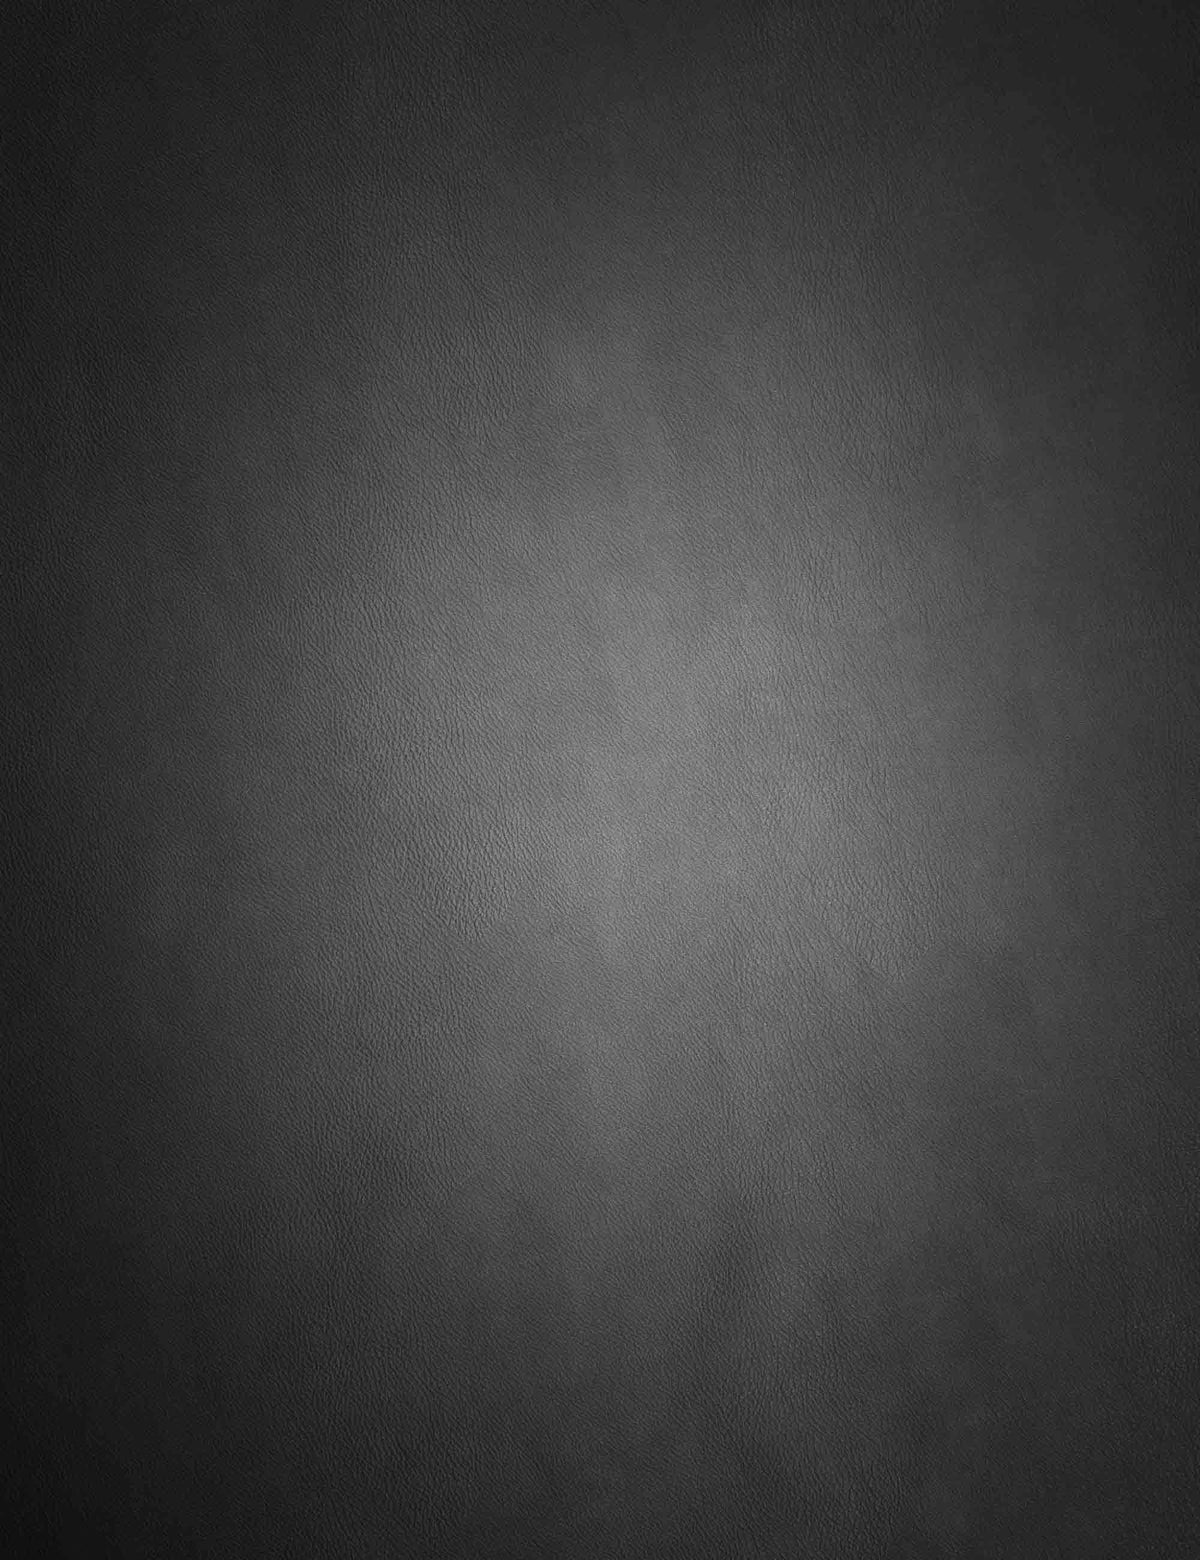 Black With lighter In Center Old Master Printed Backdrop For Photography Shopbackdrop